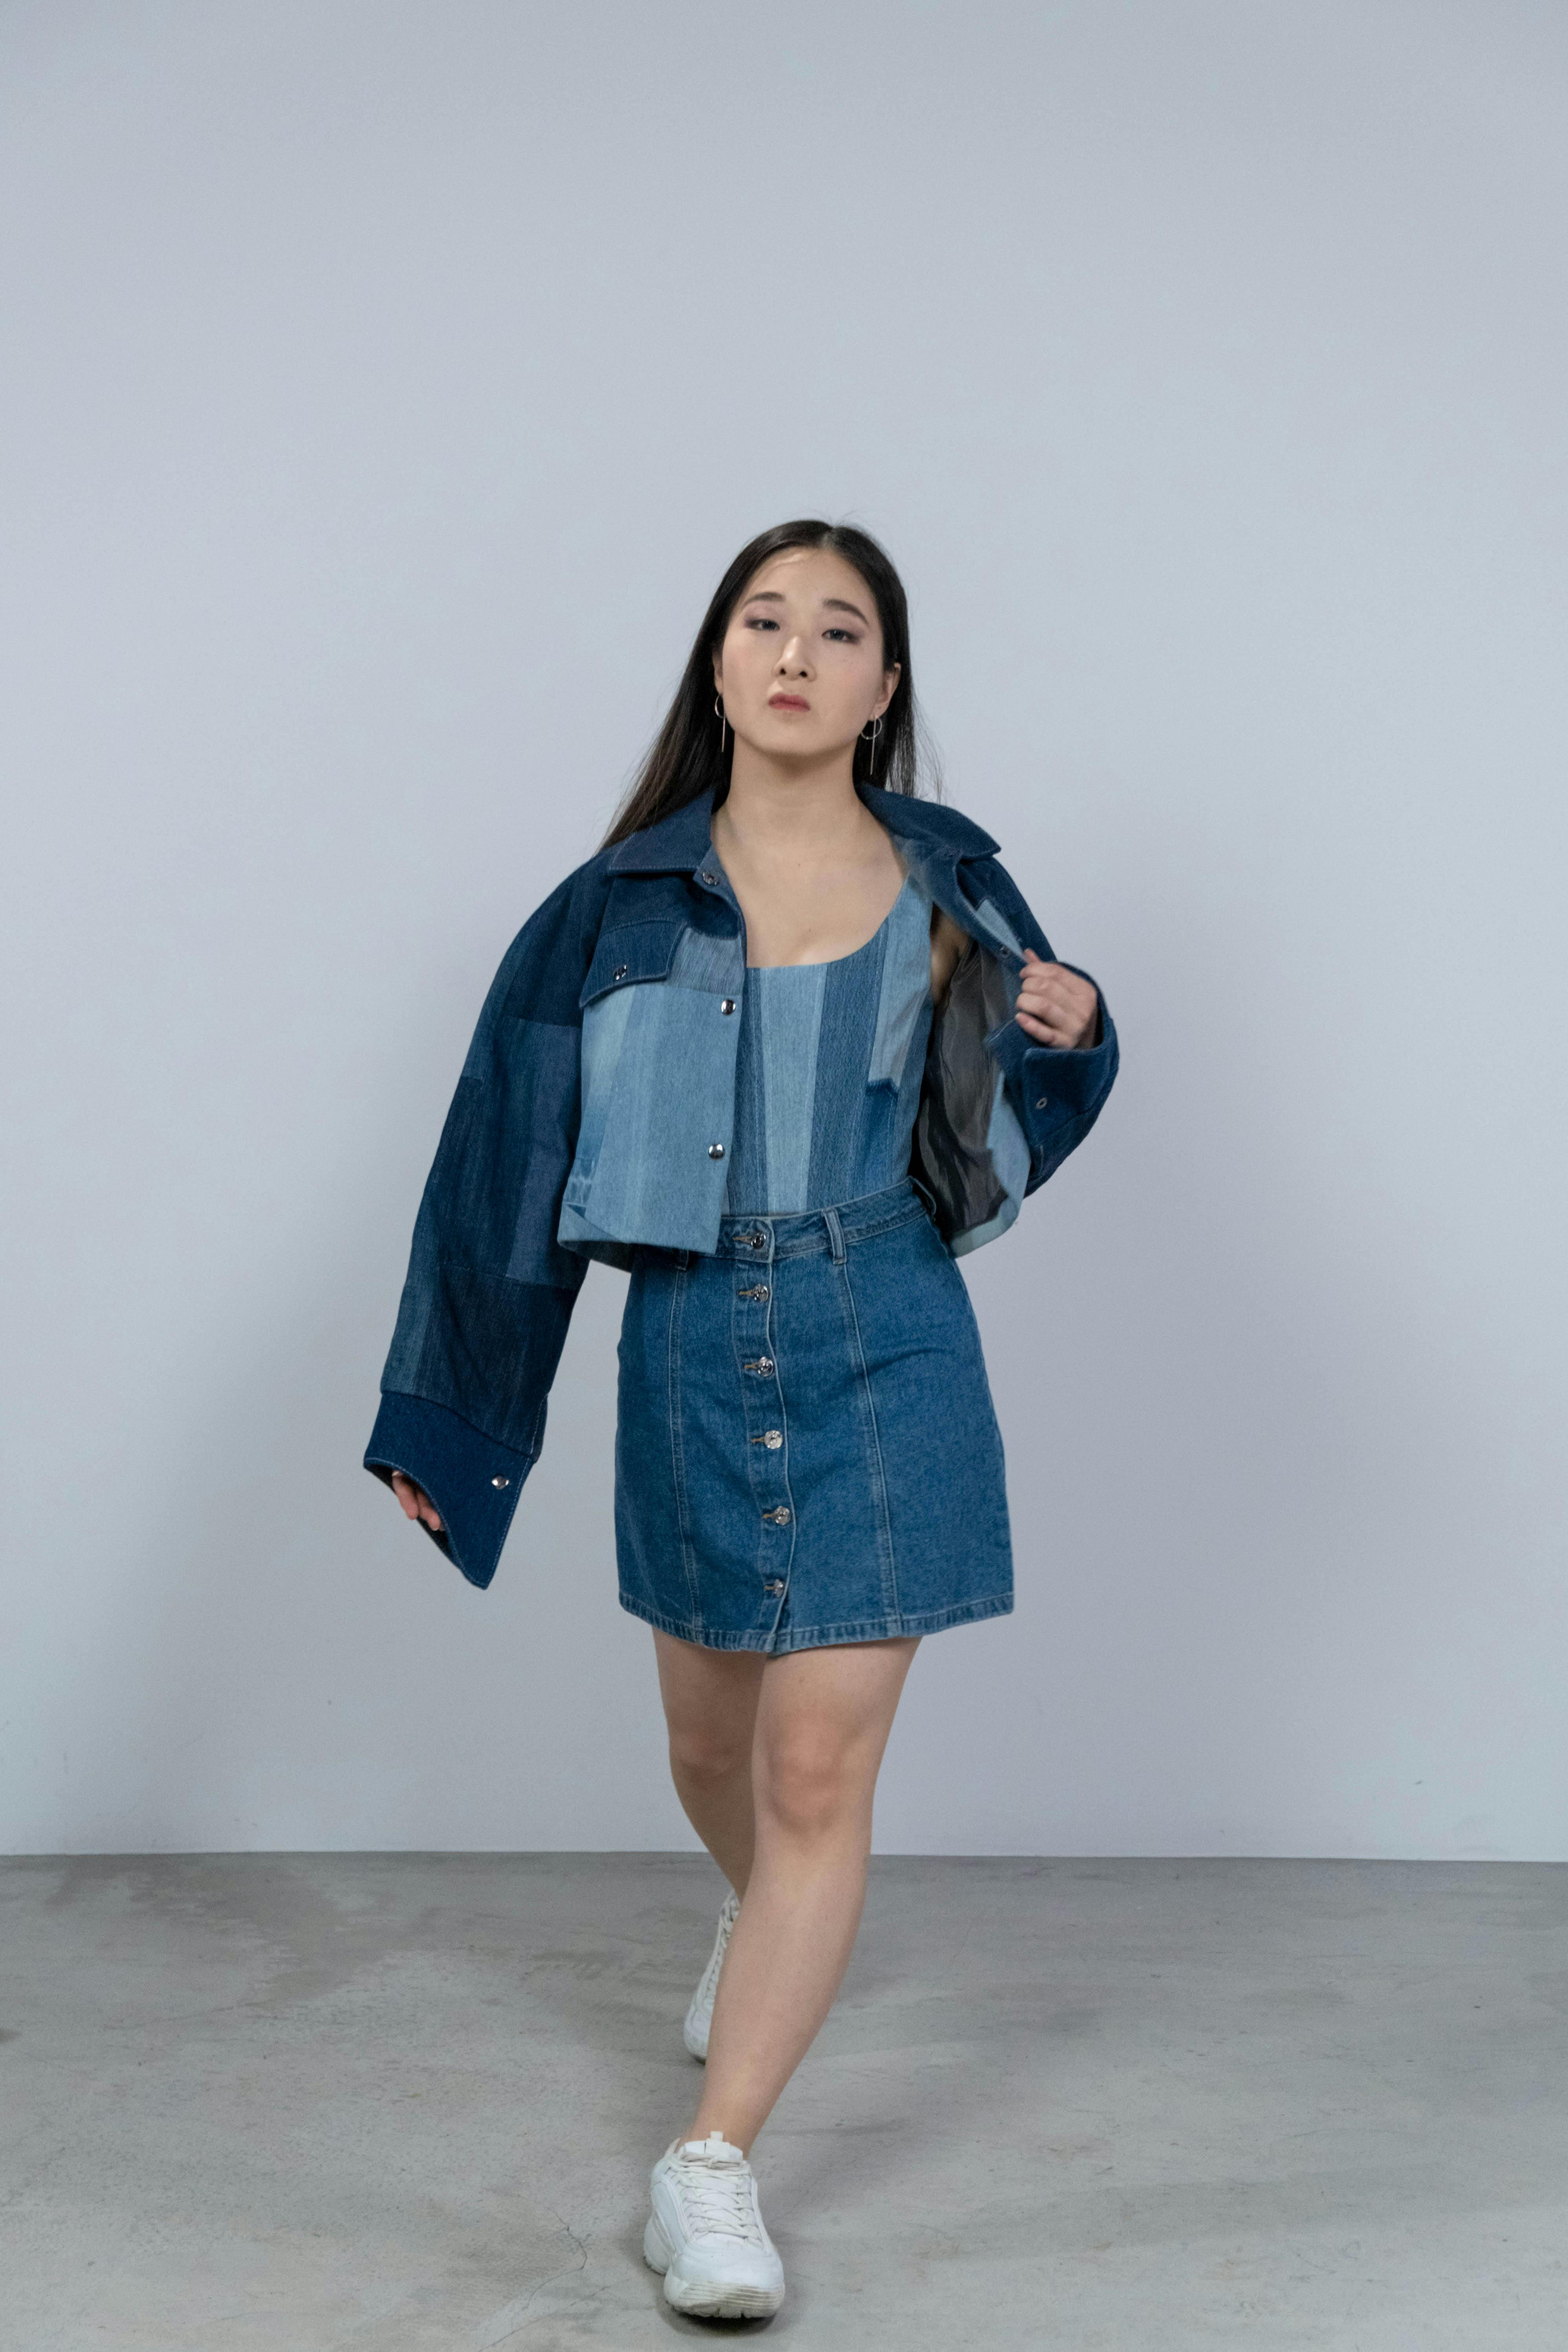 How To Style A Denim Skirt When It's Still Cool Outside | The Espresso  Edition